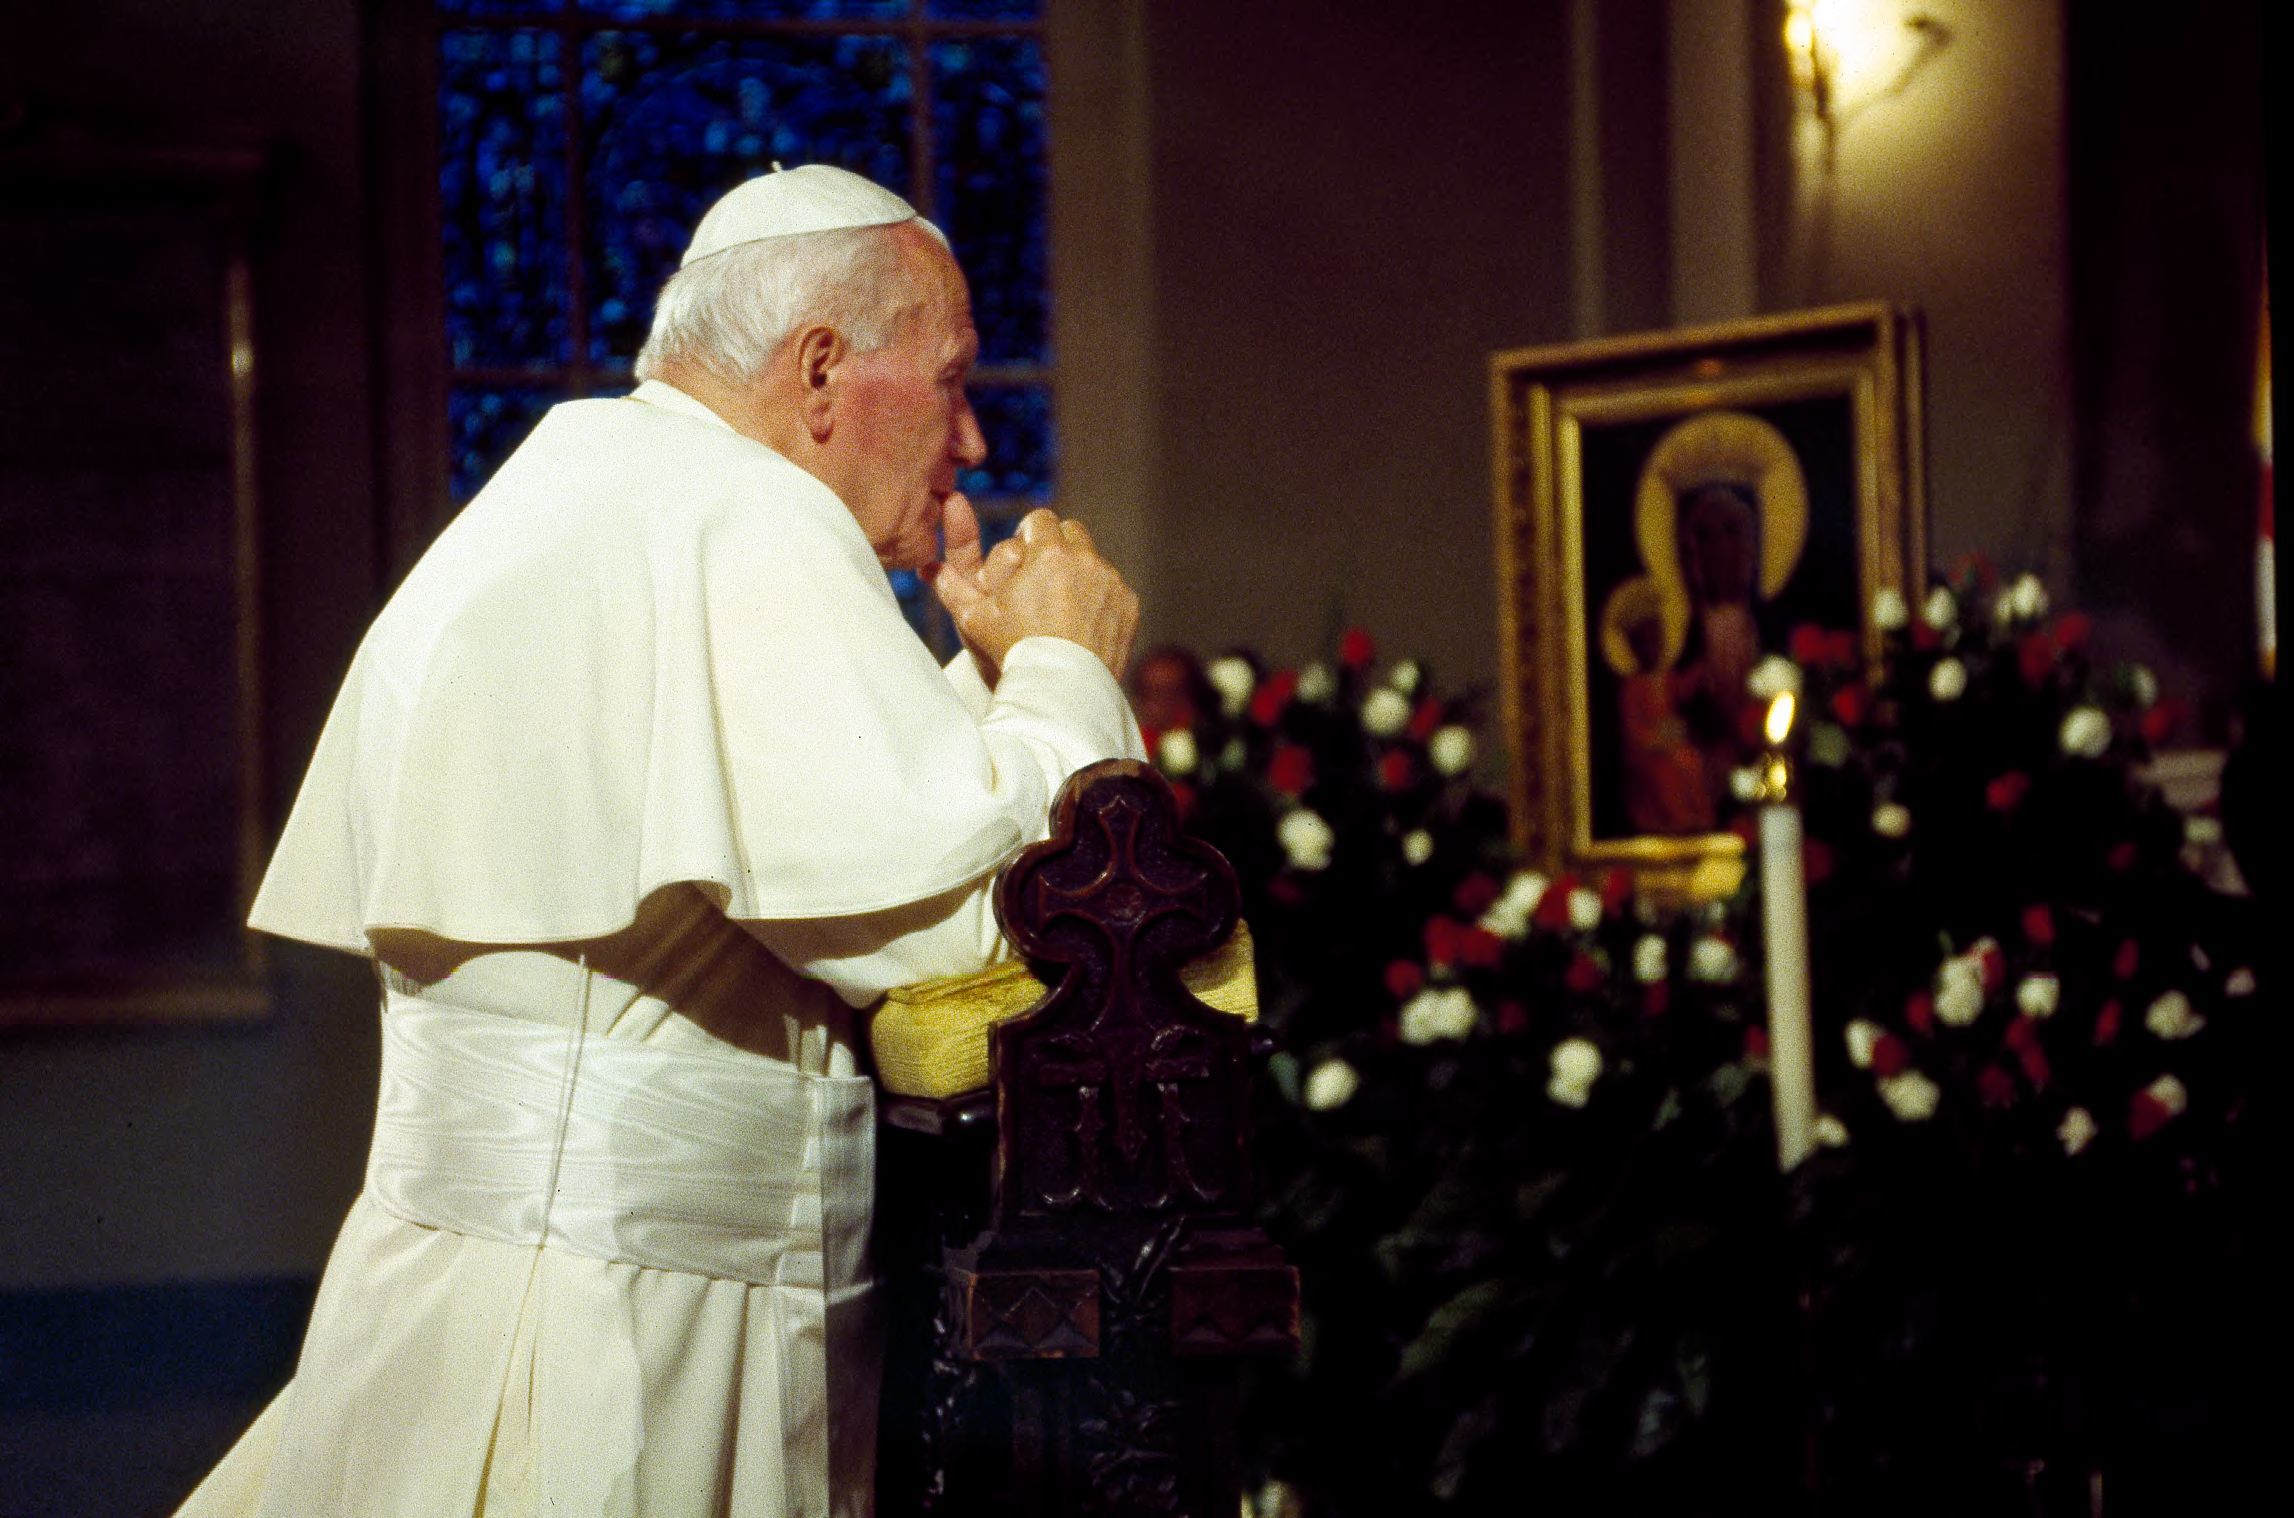 Pope John Paul II during a visit to the Baltimore Basilica 1